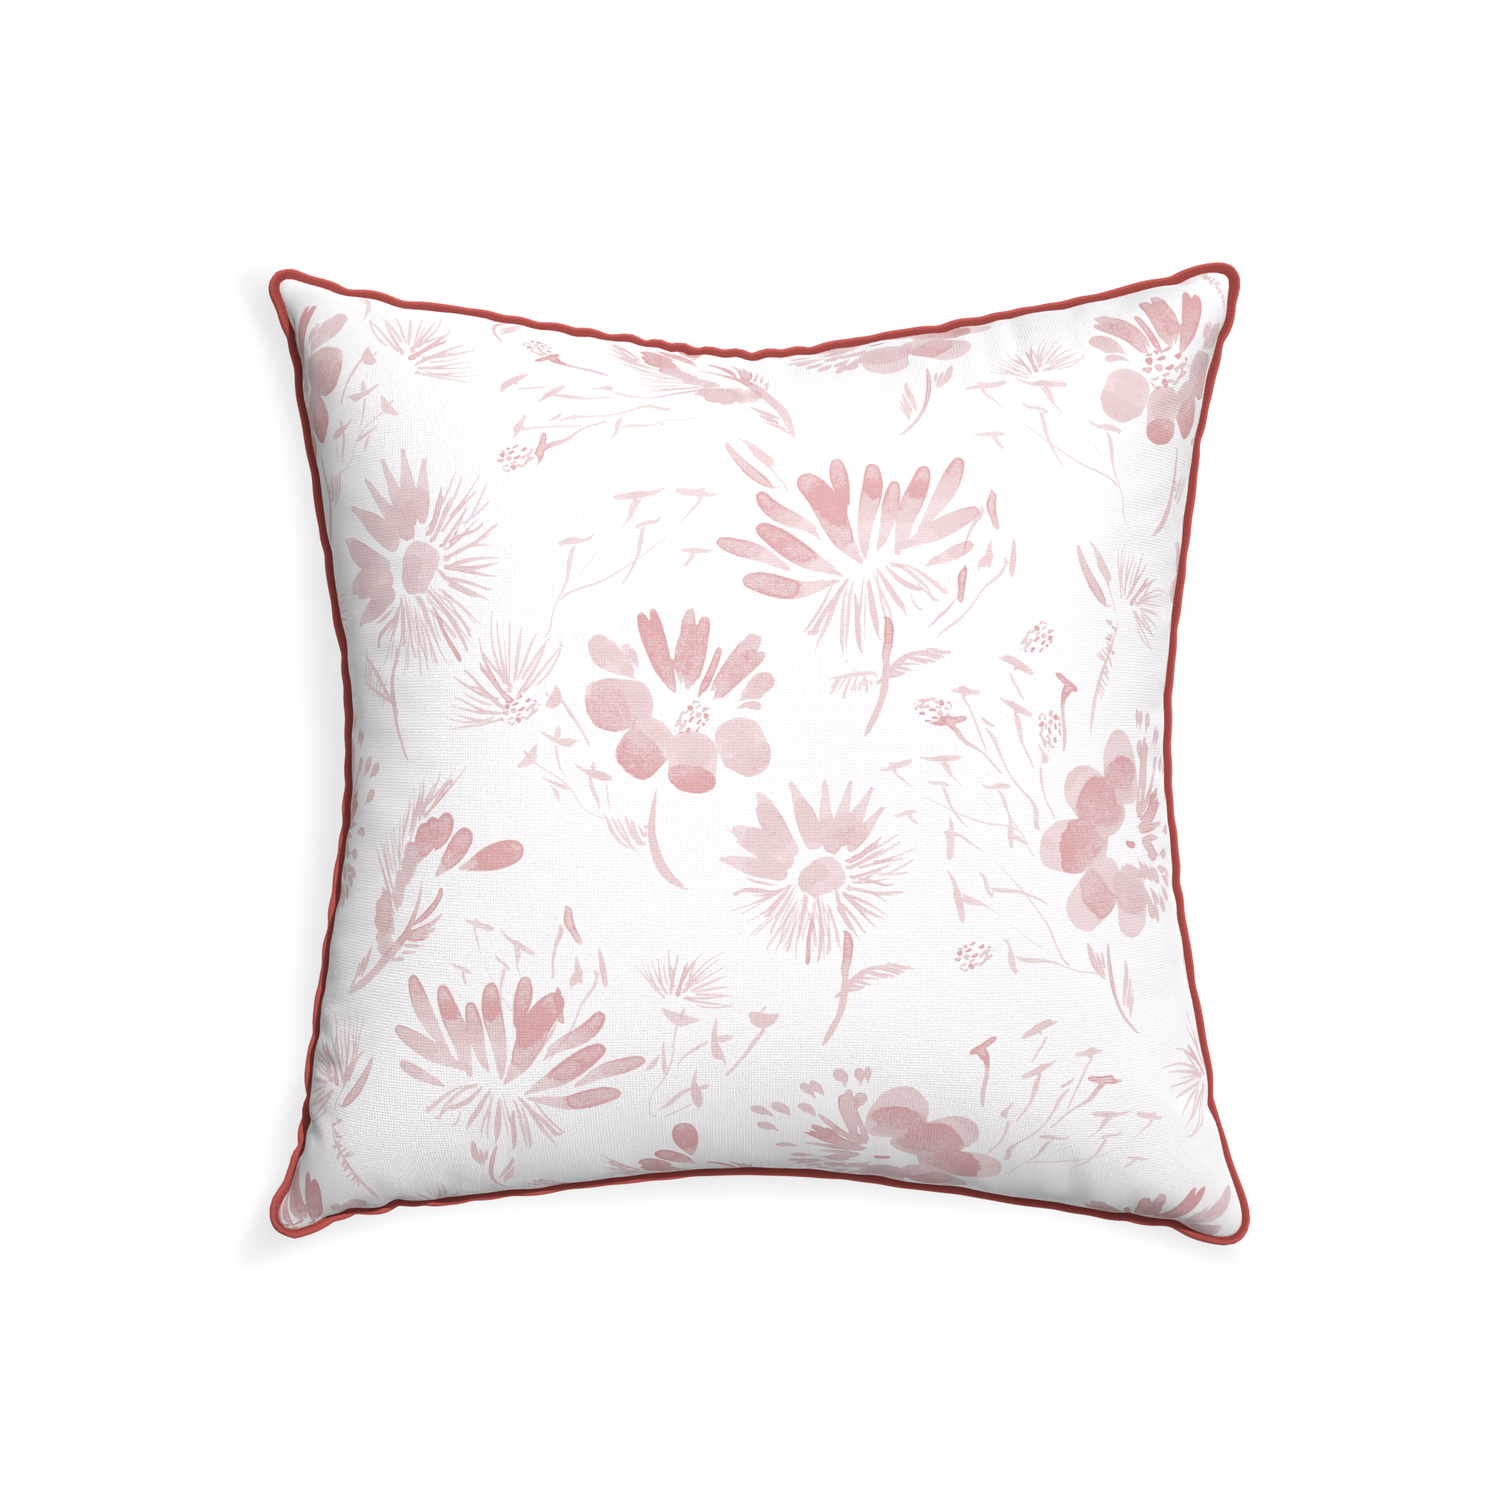 22-square blake custom pink floralpillow with c piping on white background